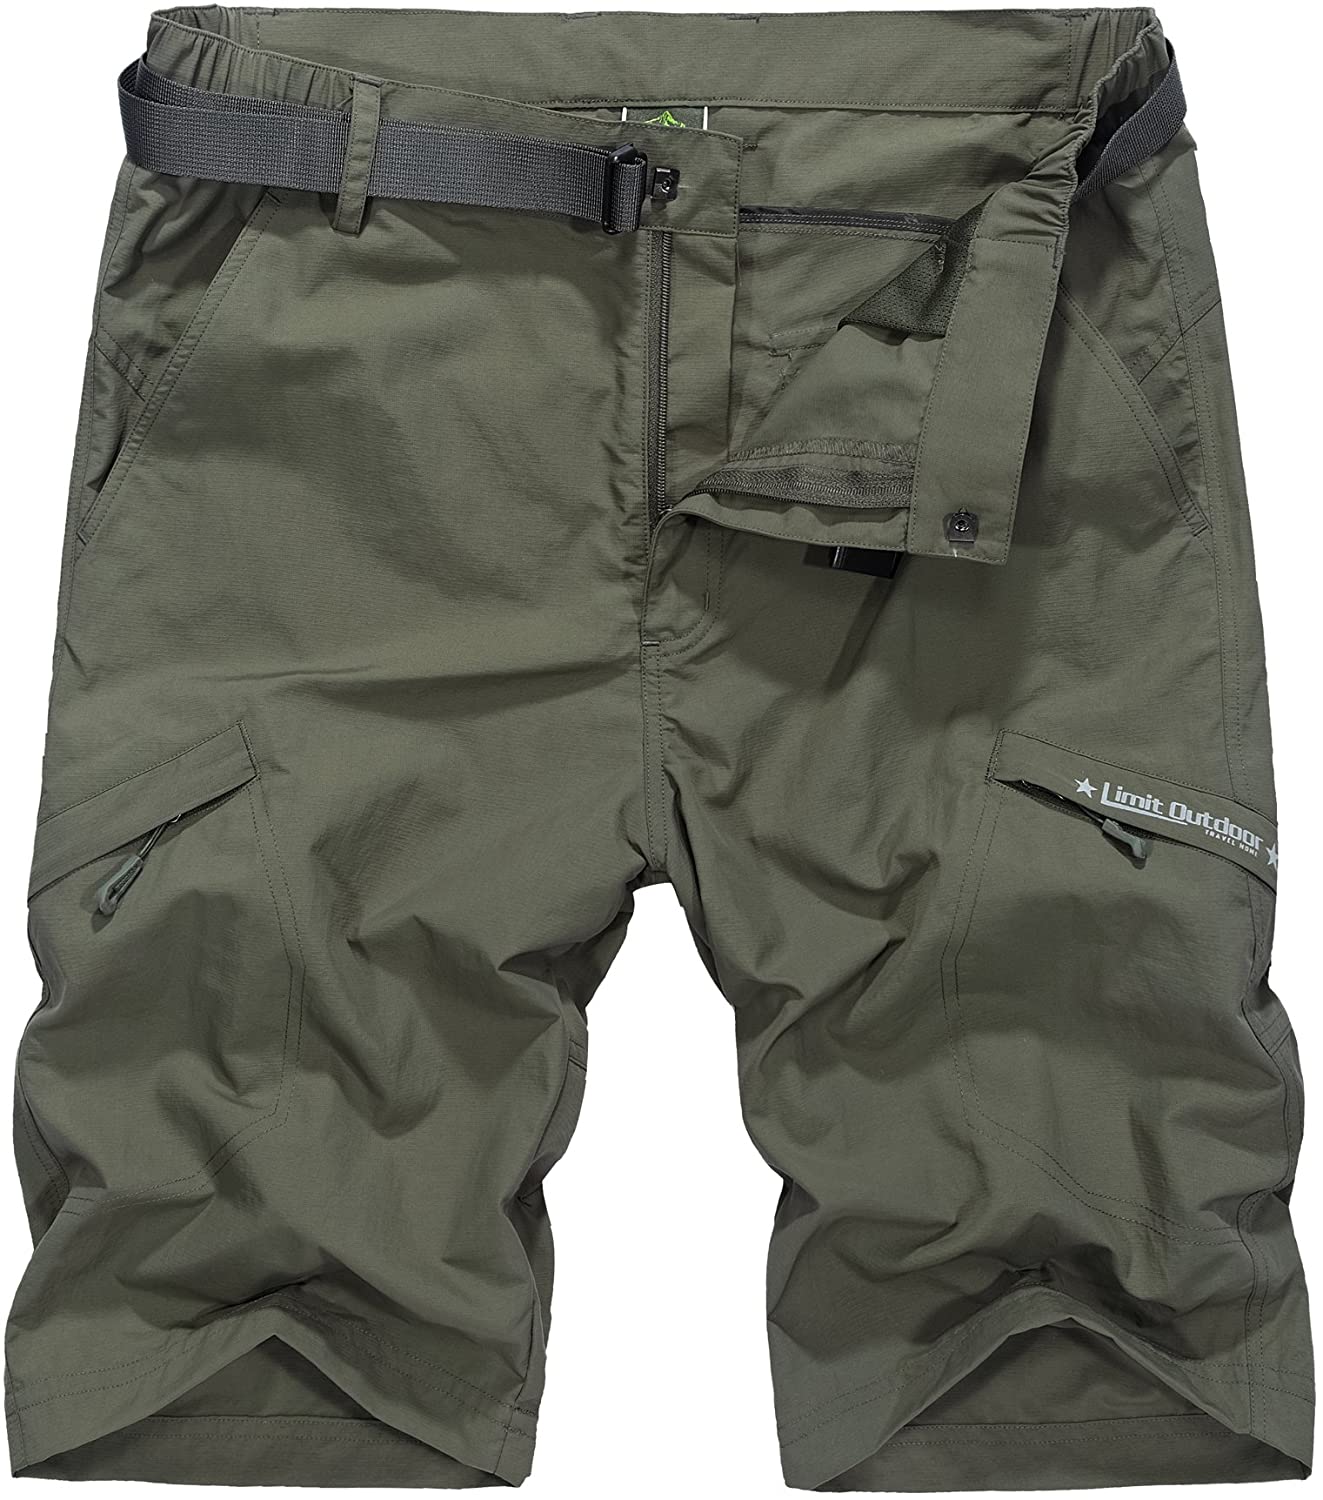 Kolongvangie Mens Outdoor Super Lightweight Quick Dry Hiking Casual Cargo Shorts with Multi Pockets No Belt